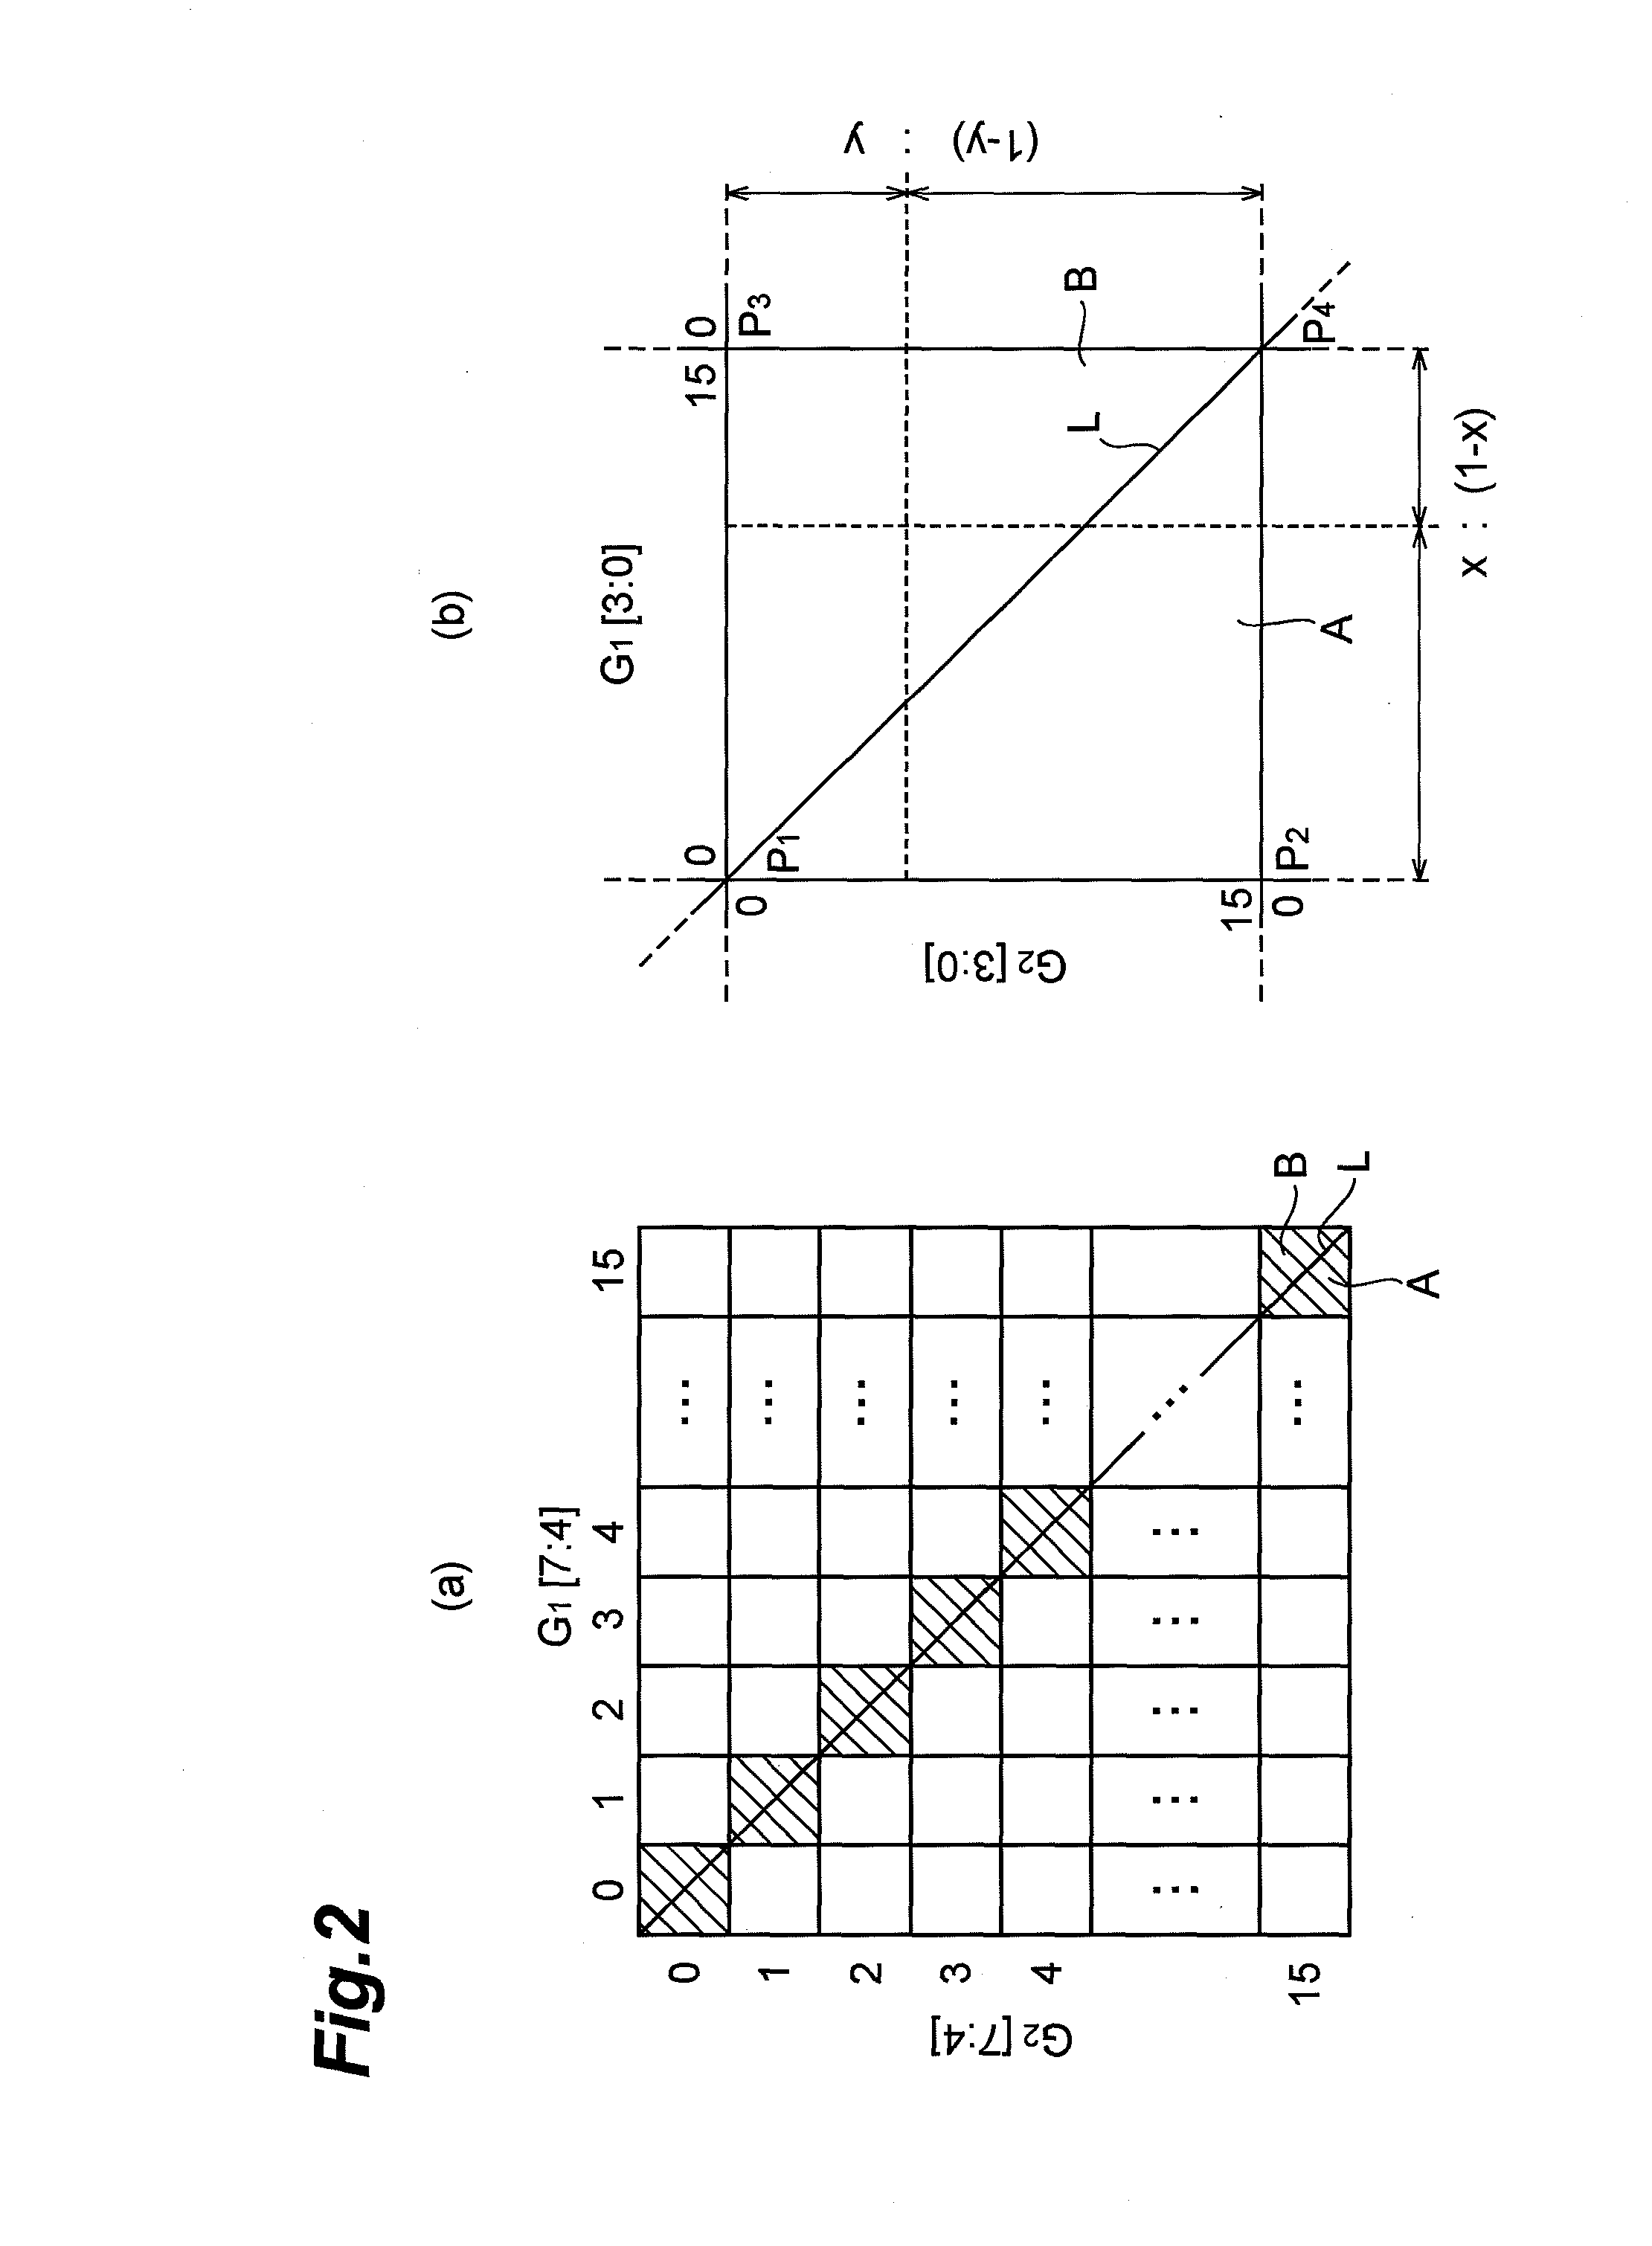 Image signal processing device